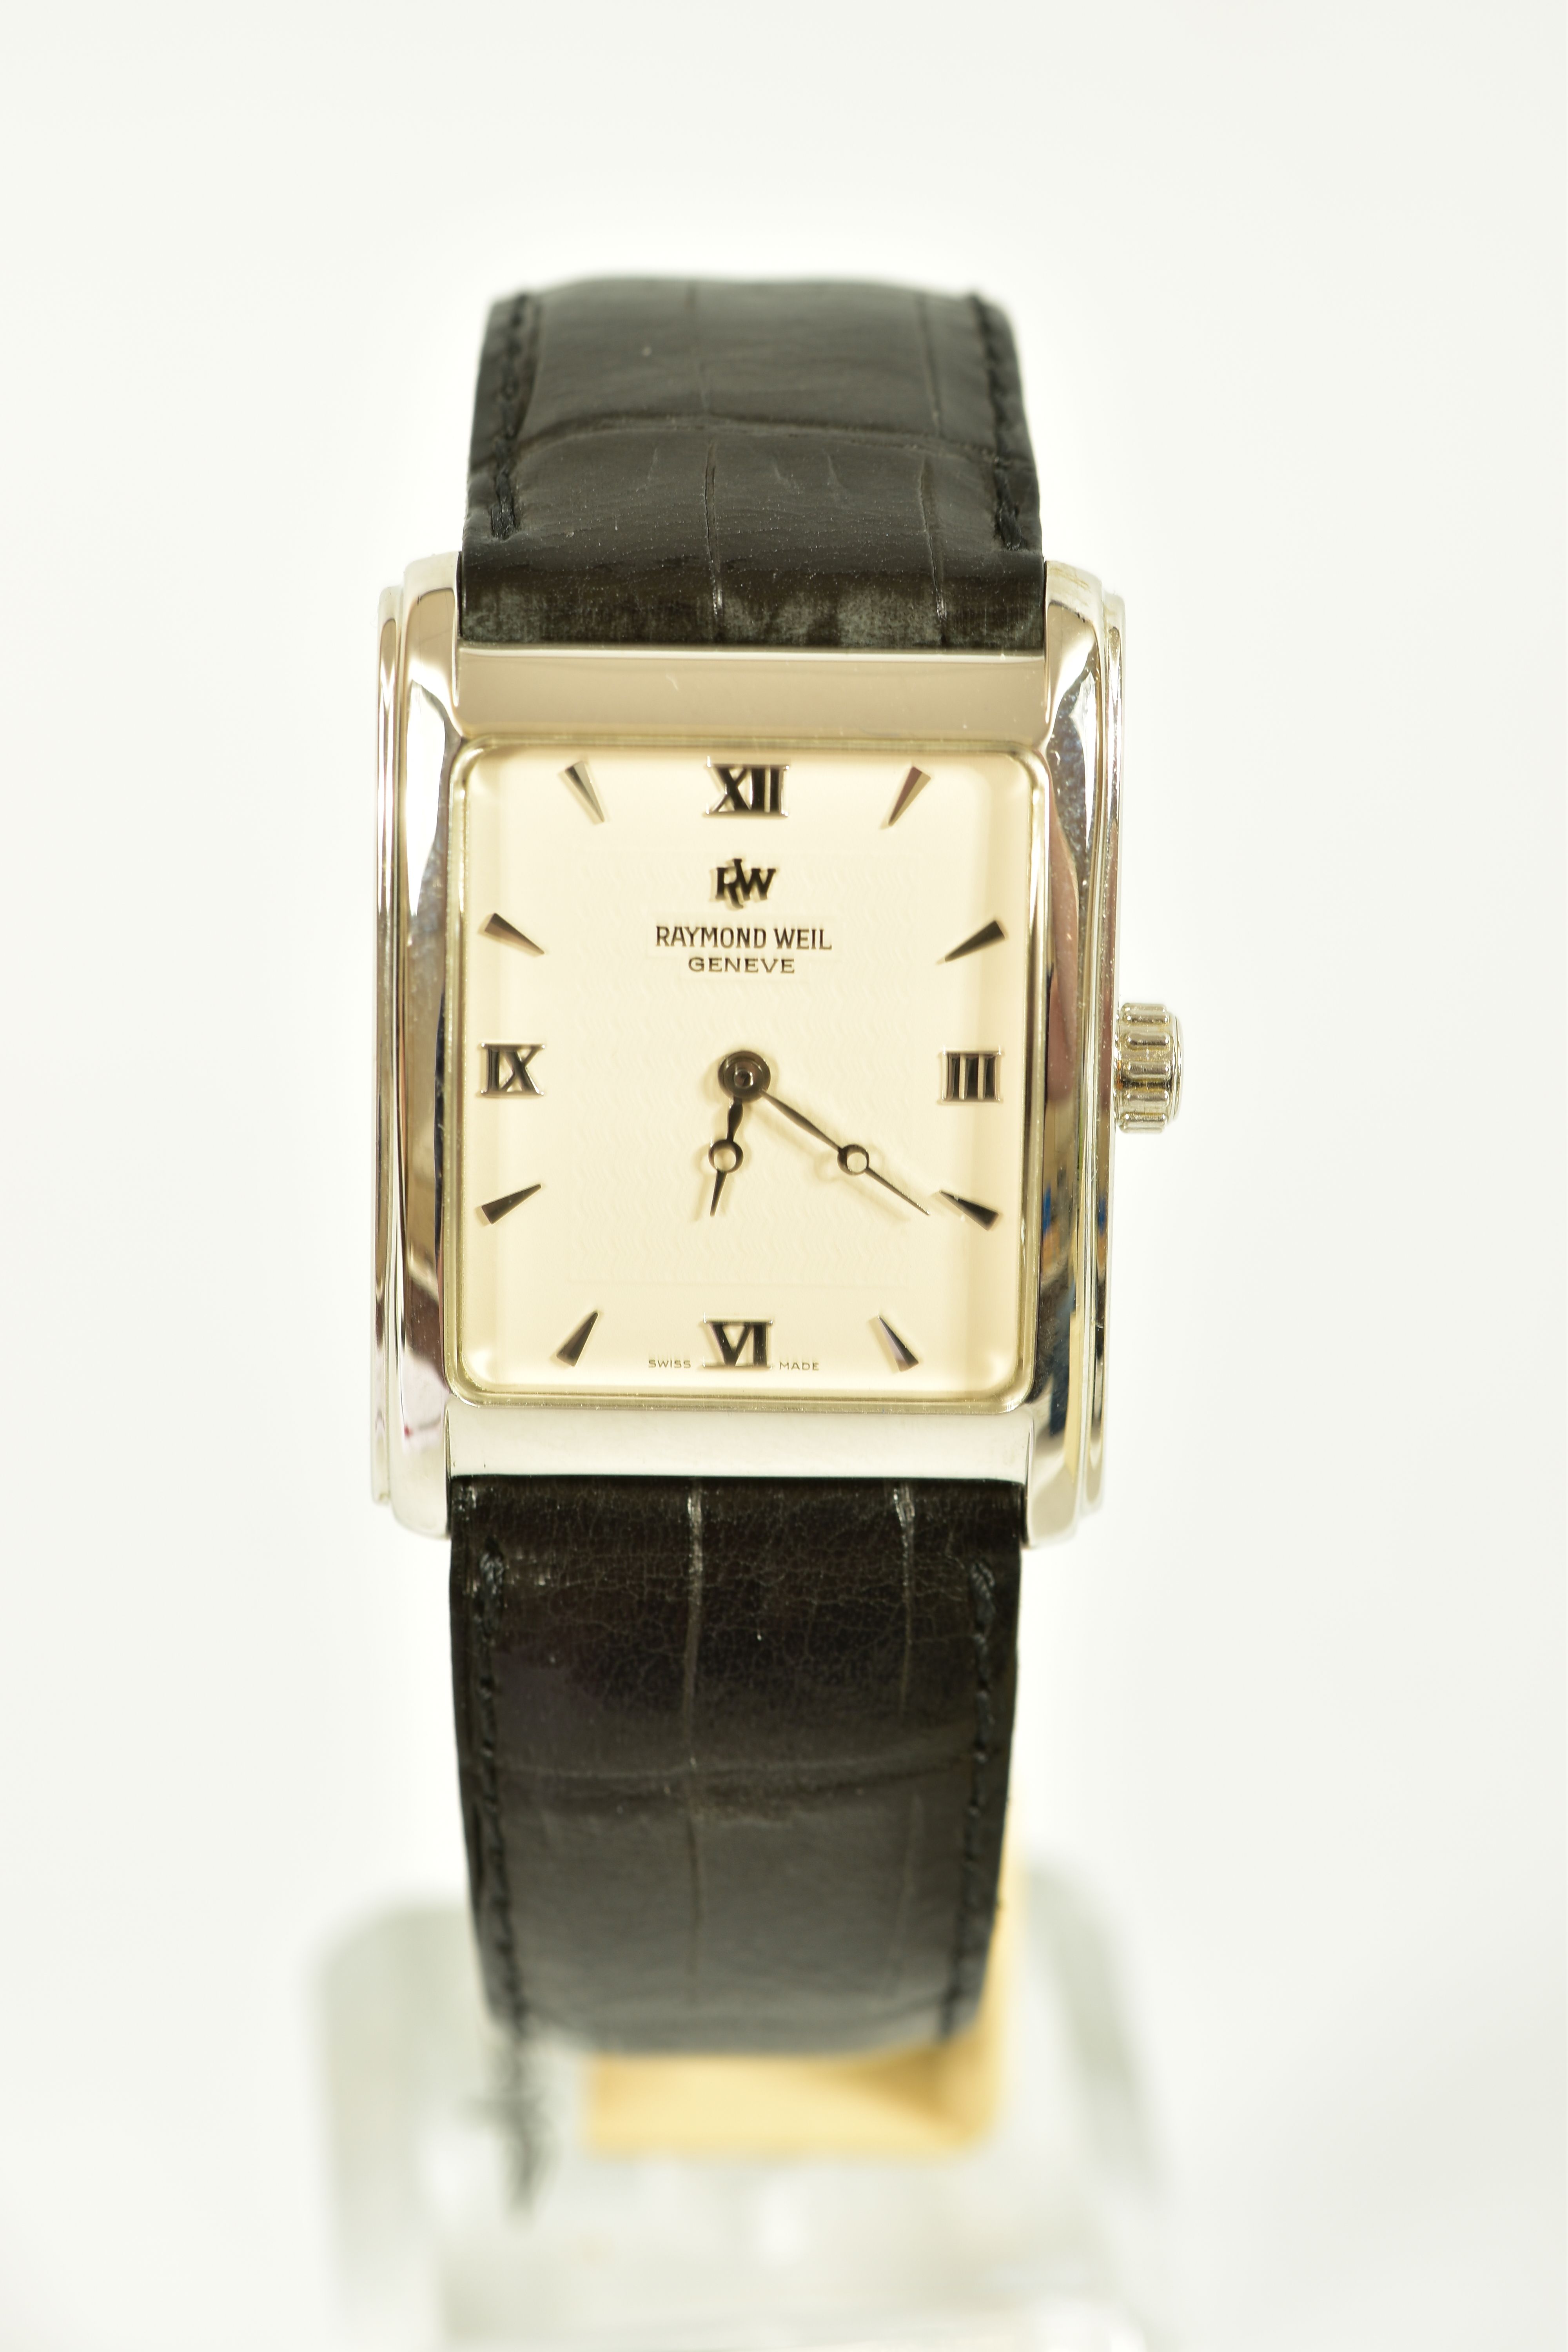 A RAYMOND WEIL GOLD-PLATED MECHANICAL WRISTWATCH, cream textured dial with tapered baton and roman